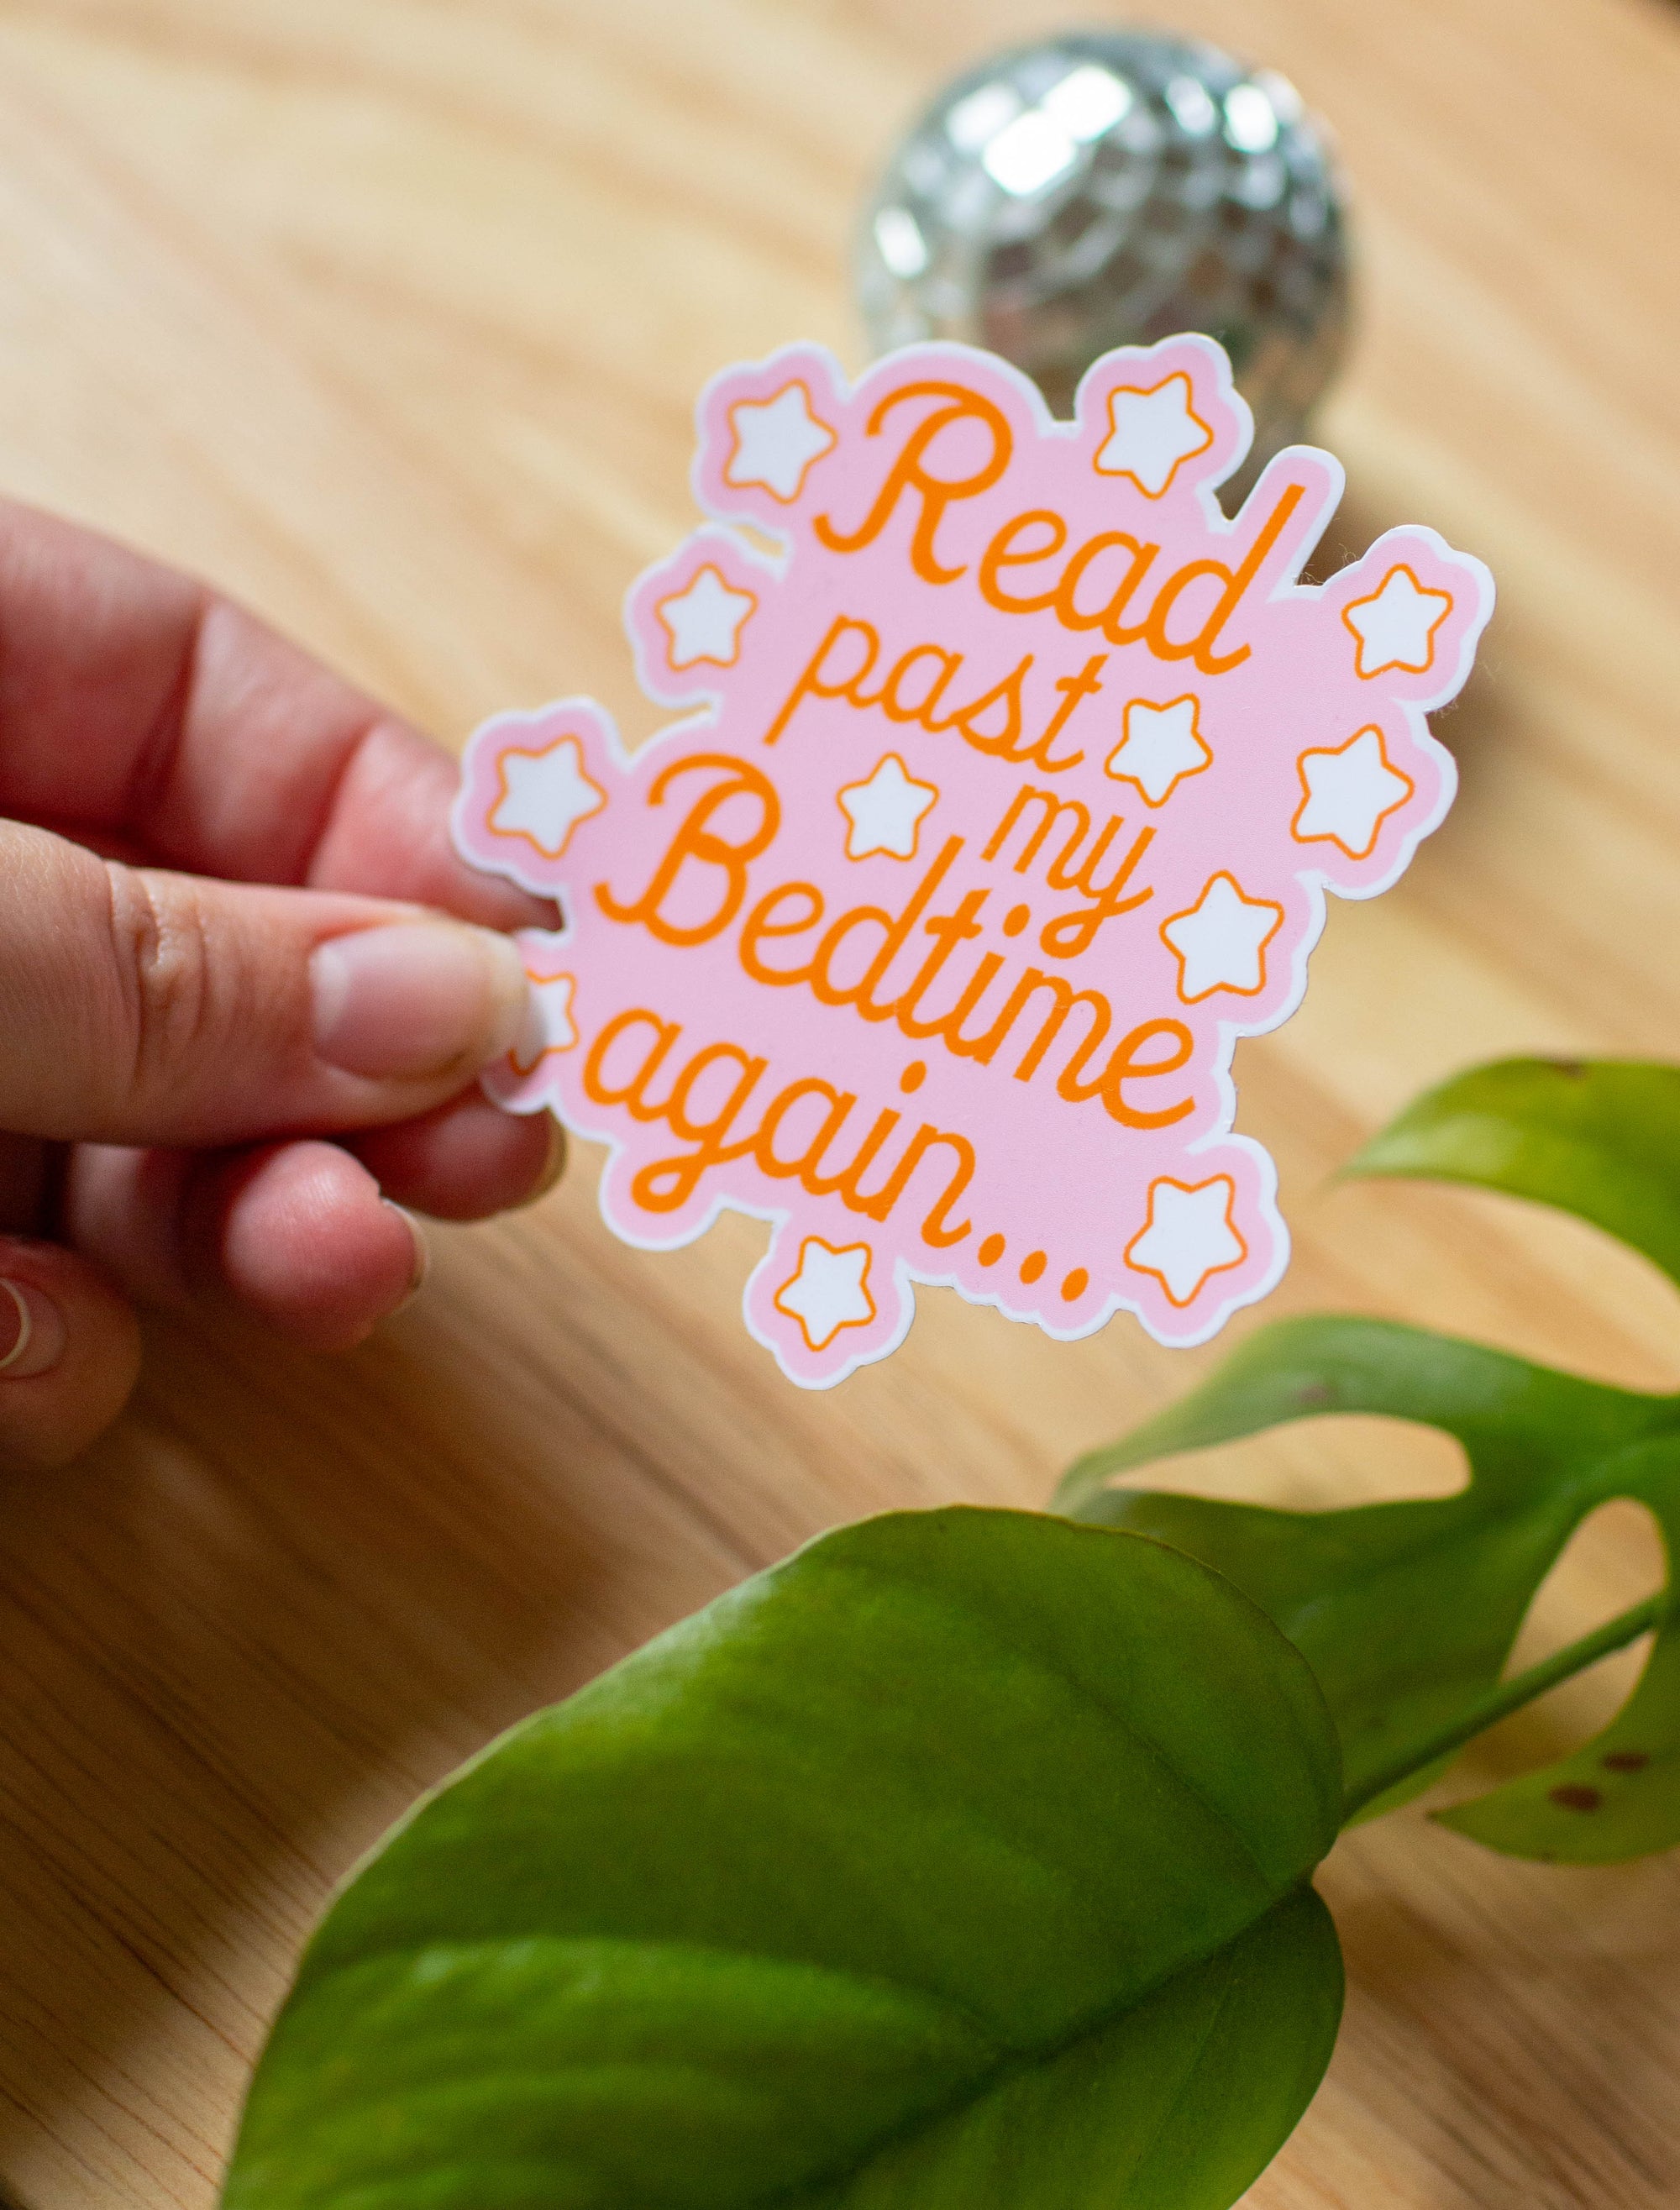 Read past my Bedtime again Sticker